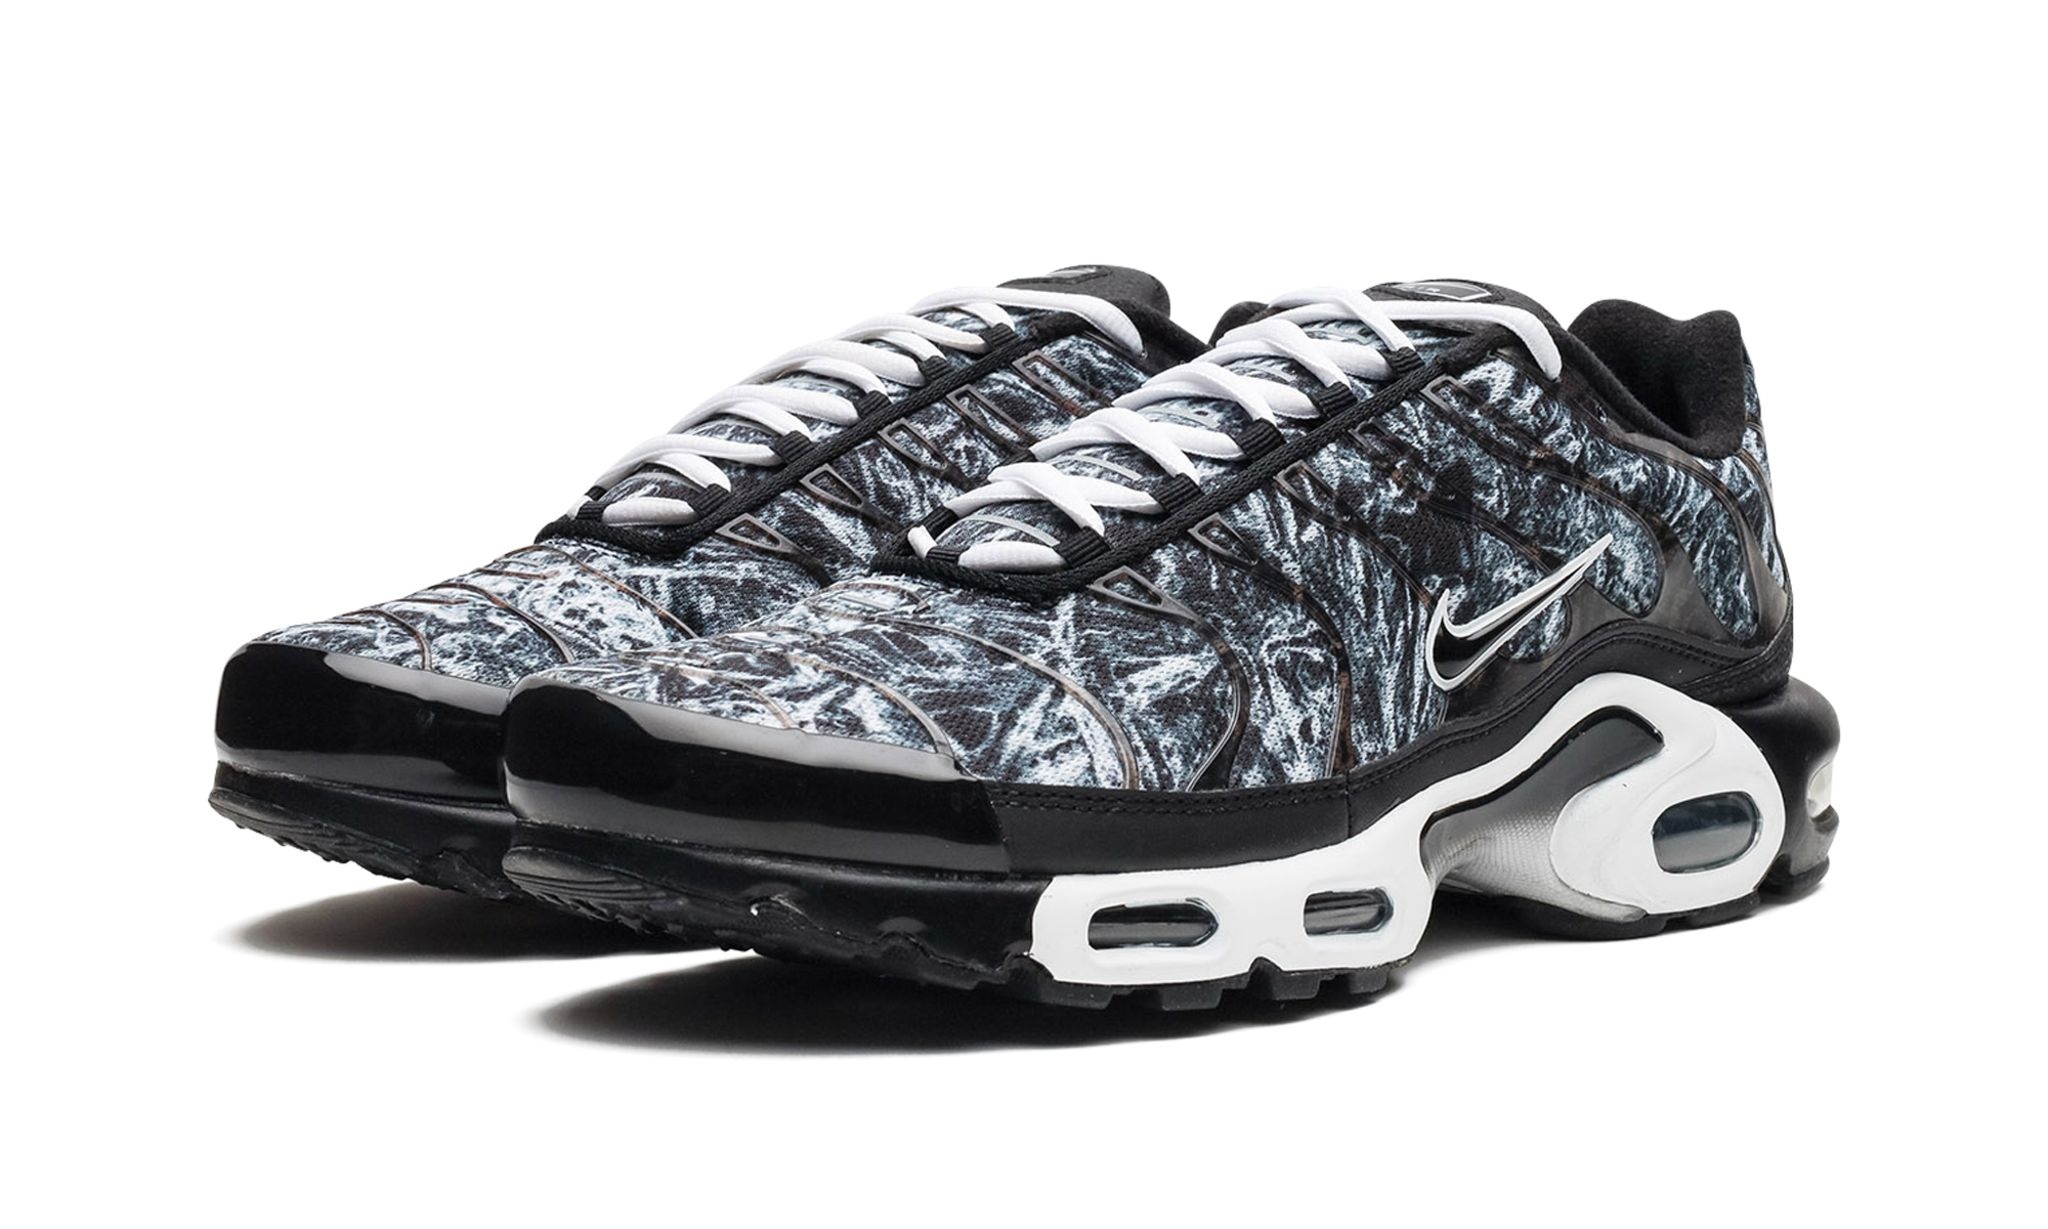 Air Max Plus AMP "Shattered Ice" - 2